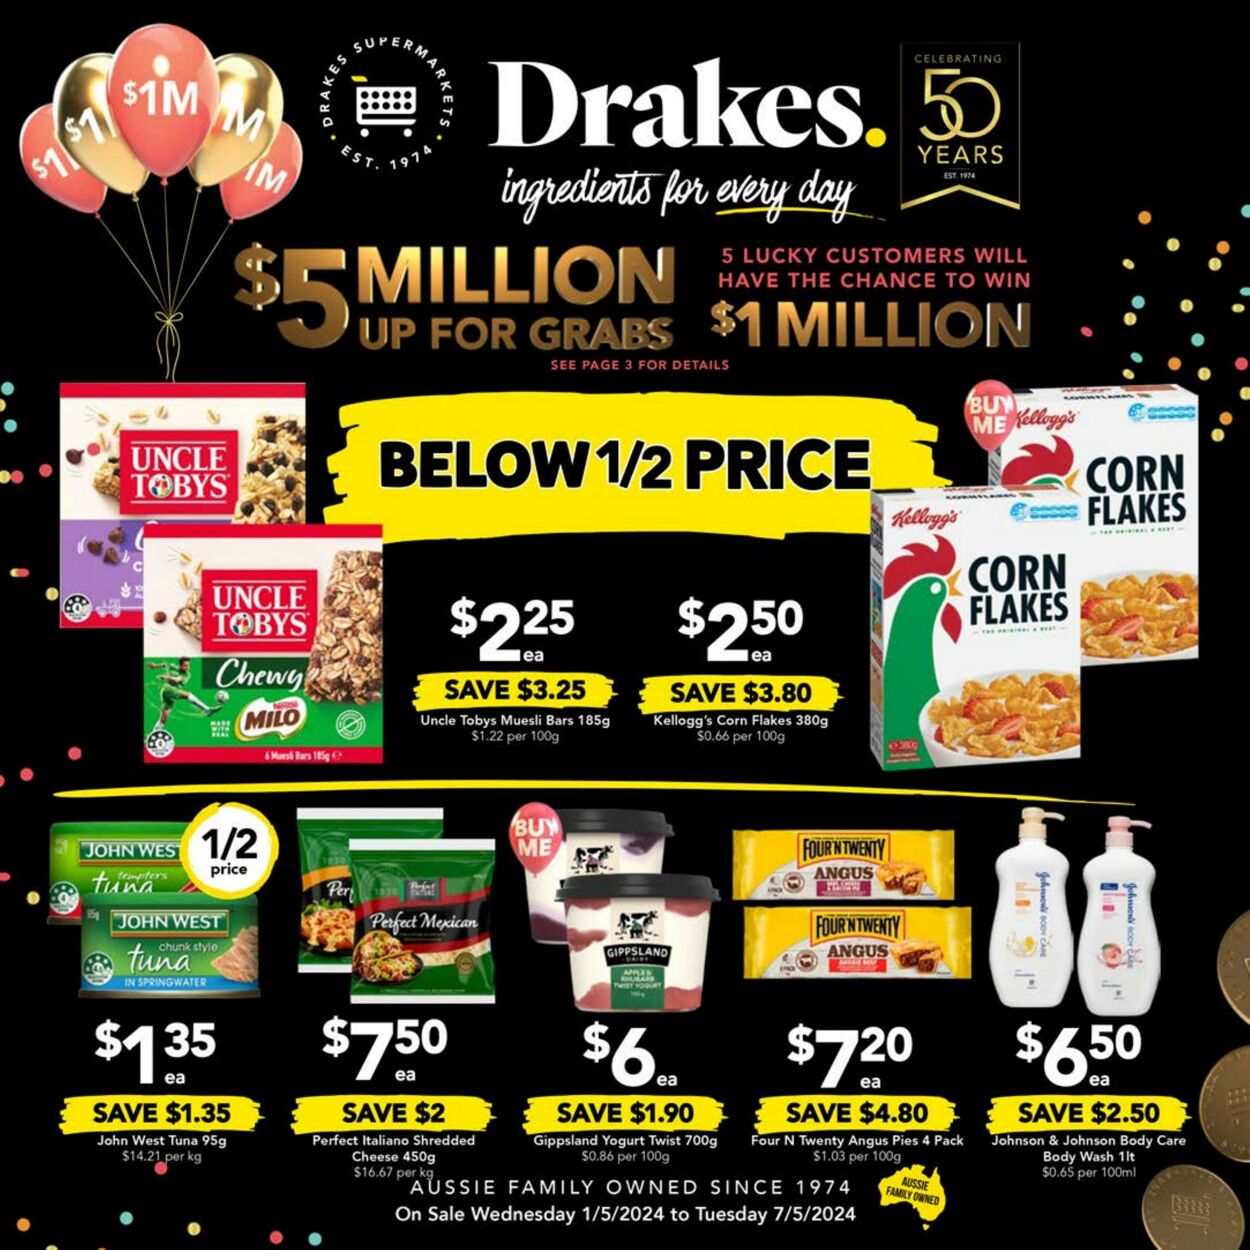 Drakes Supermarkets Promotional catalogues